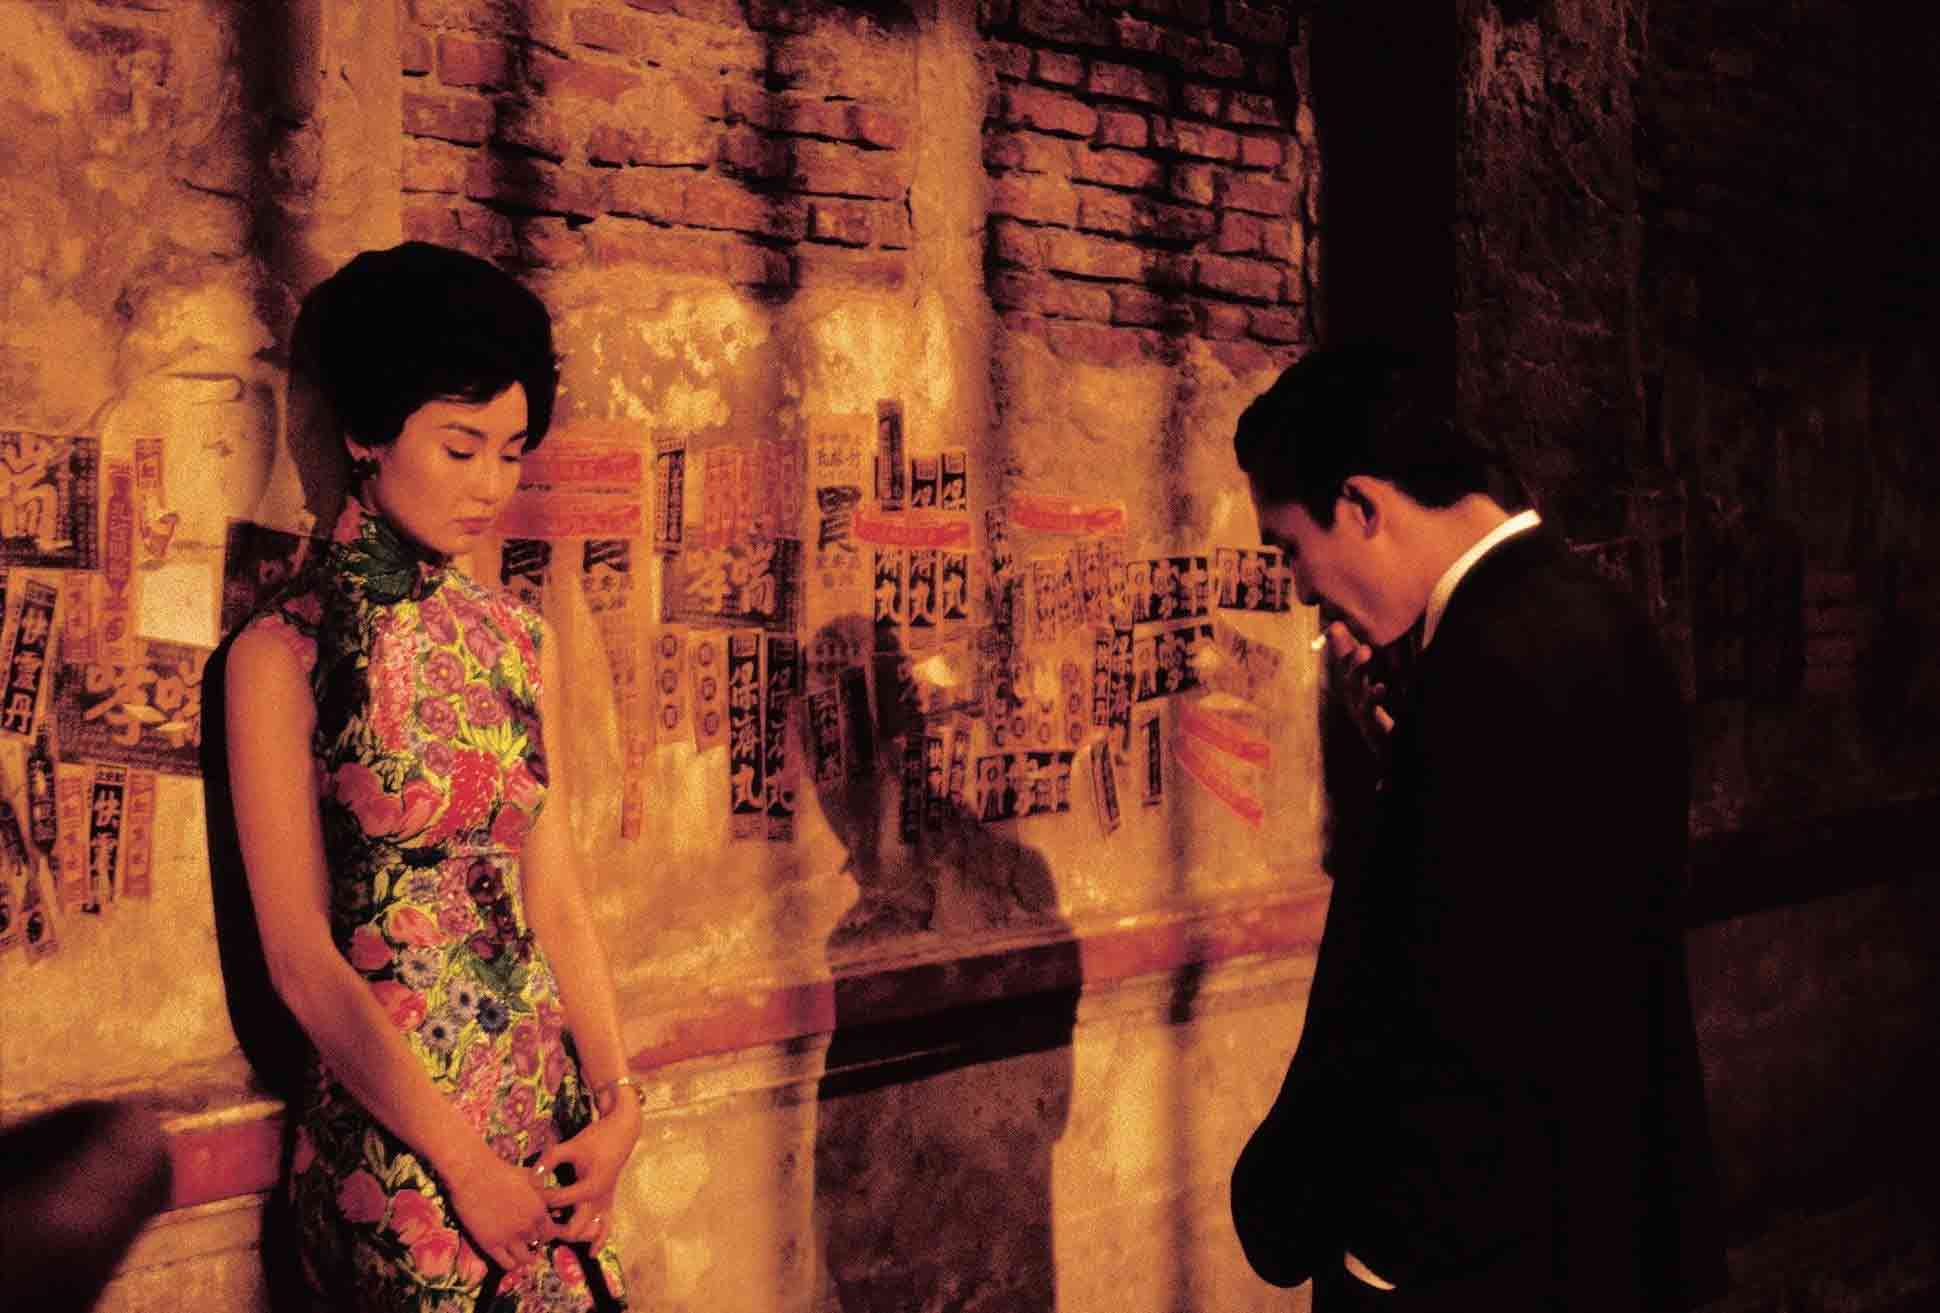 In the mood for love by Wong Kar Wai, part of which was shot in Bangkok, Thailand's Chinatown